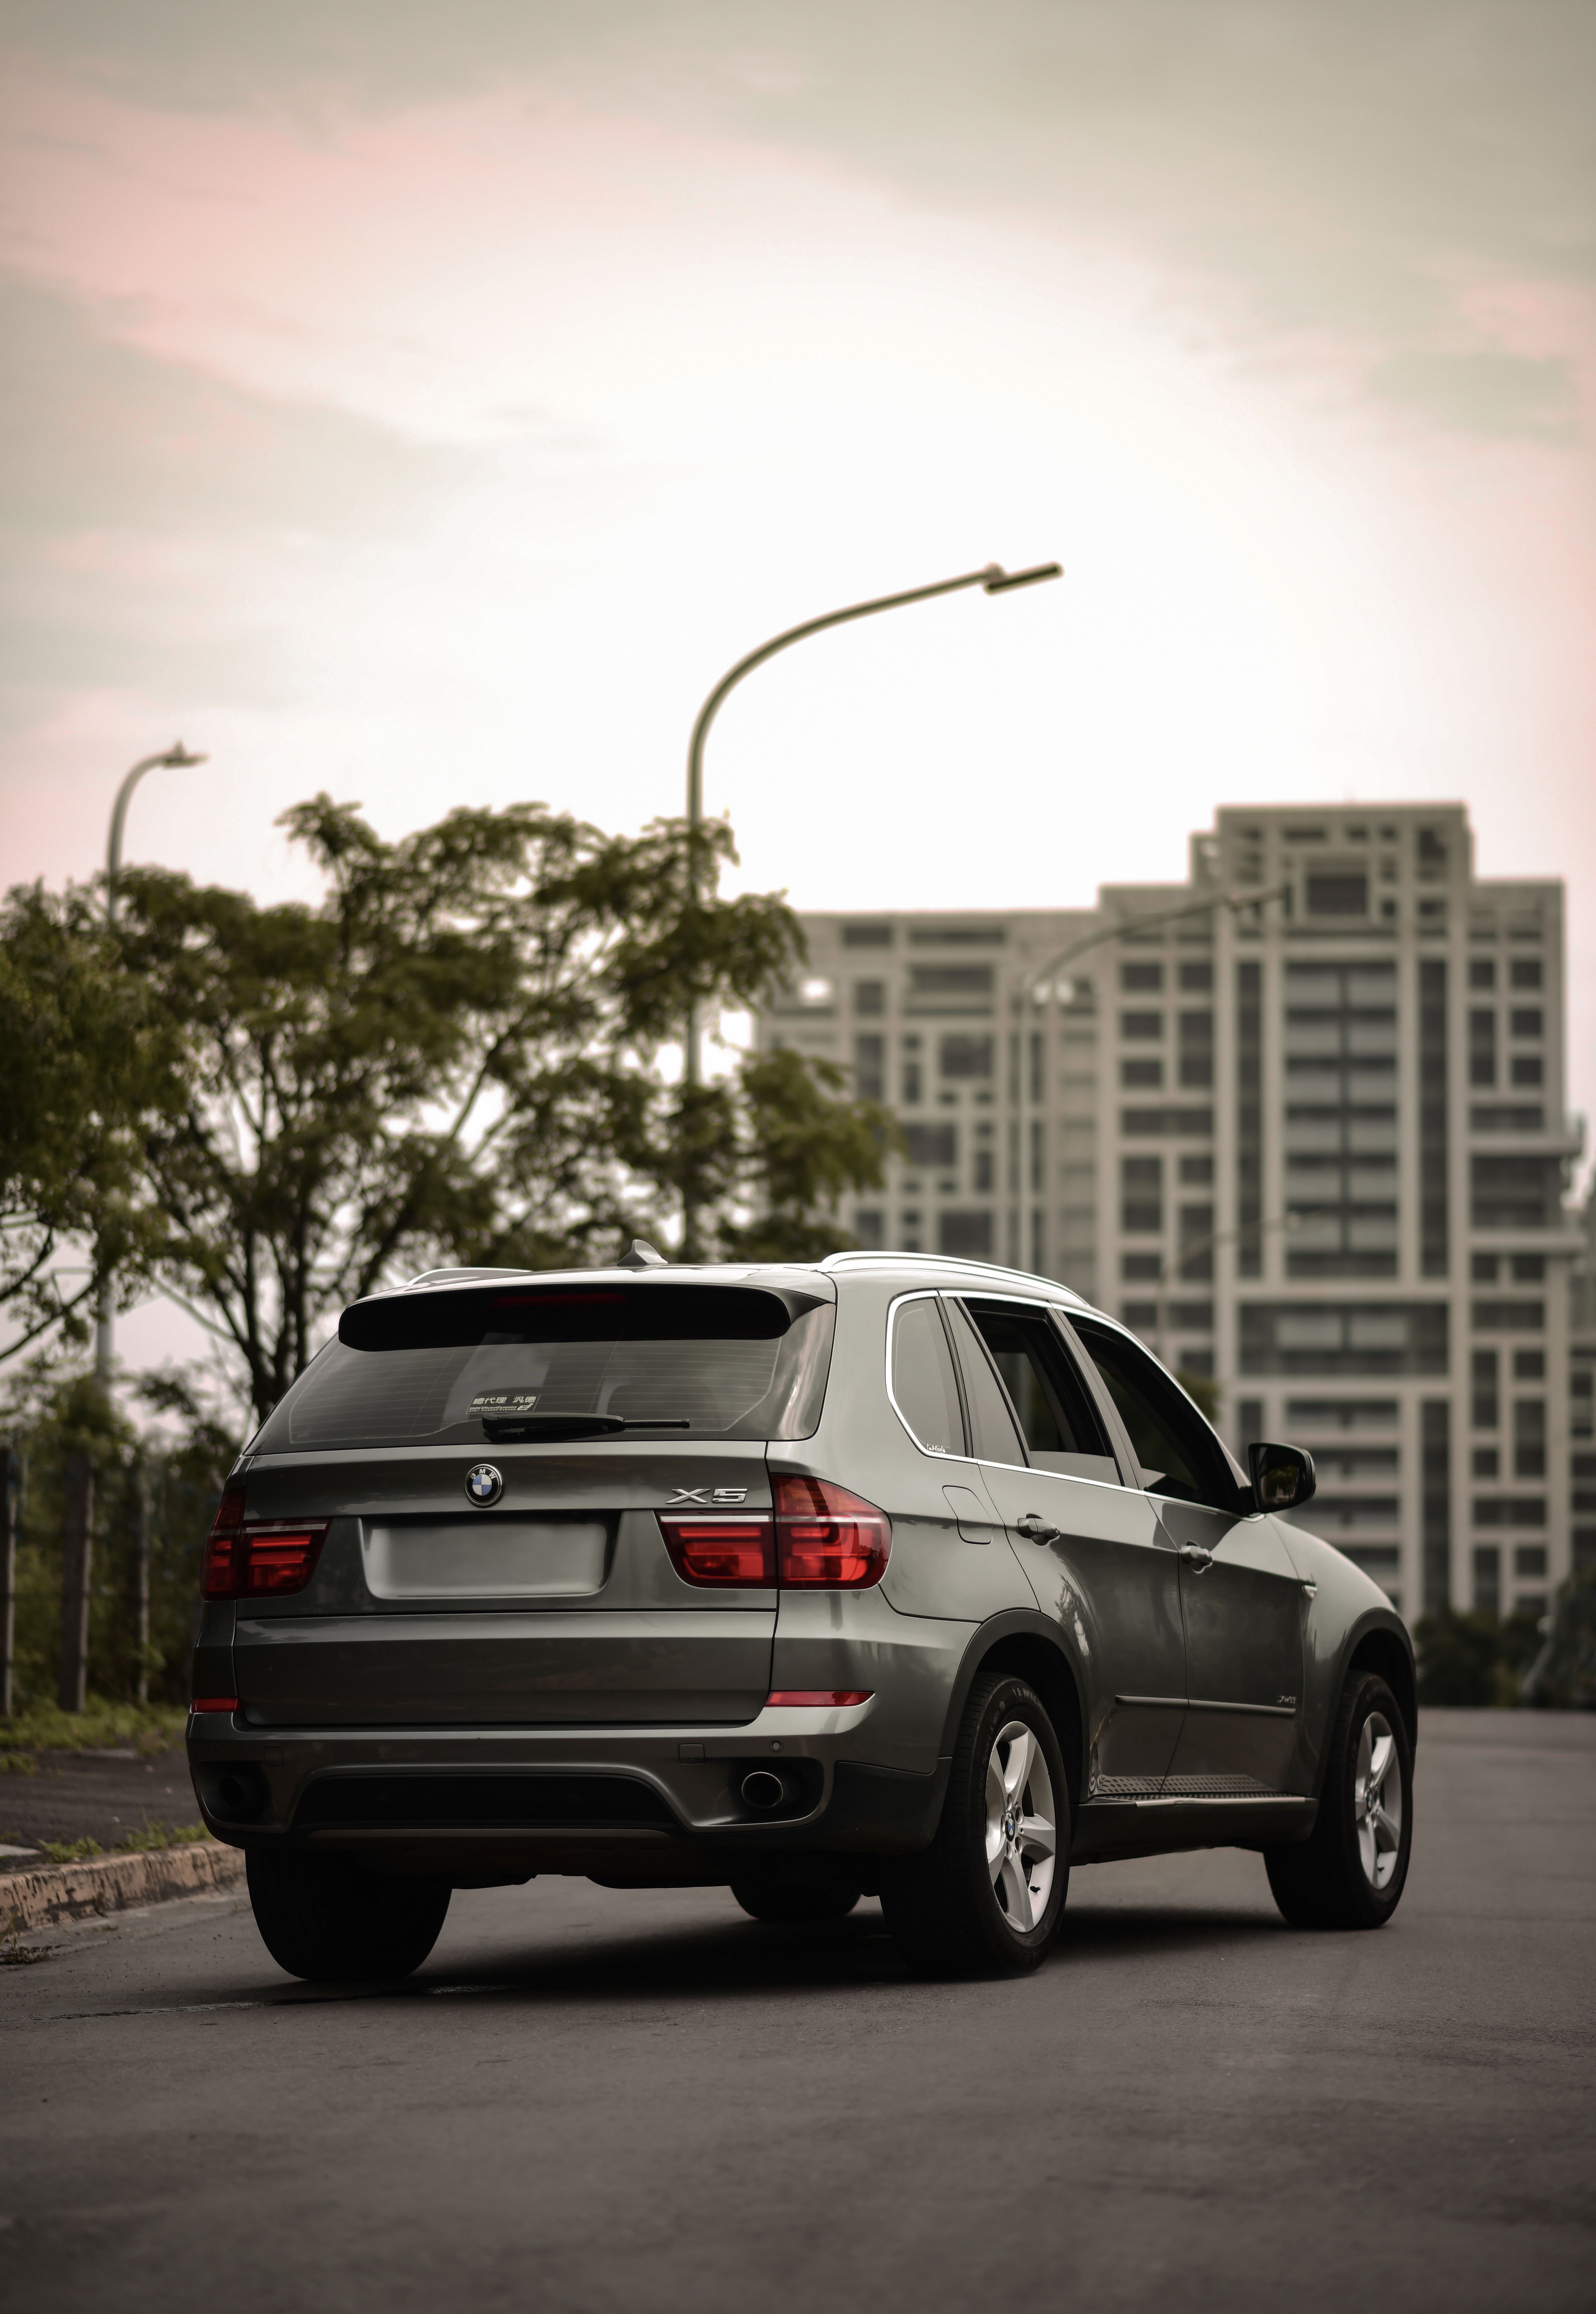 New Lock Screen Wallpapers side view, bmw, cars, suv, bmw x5